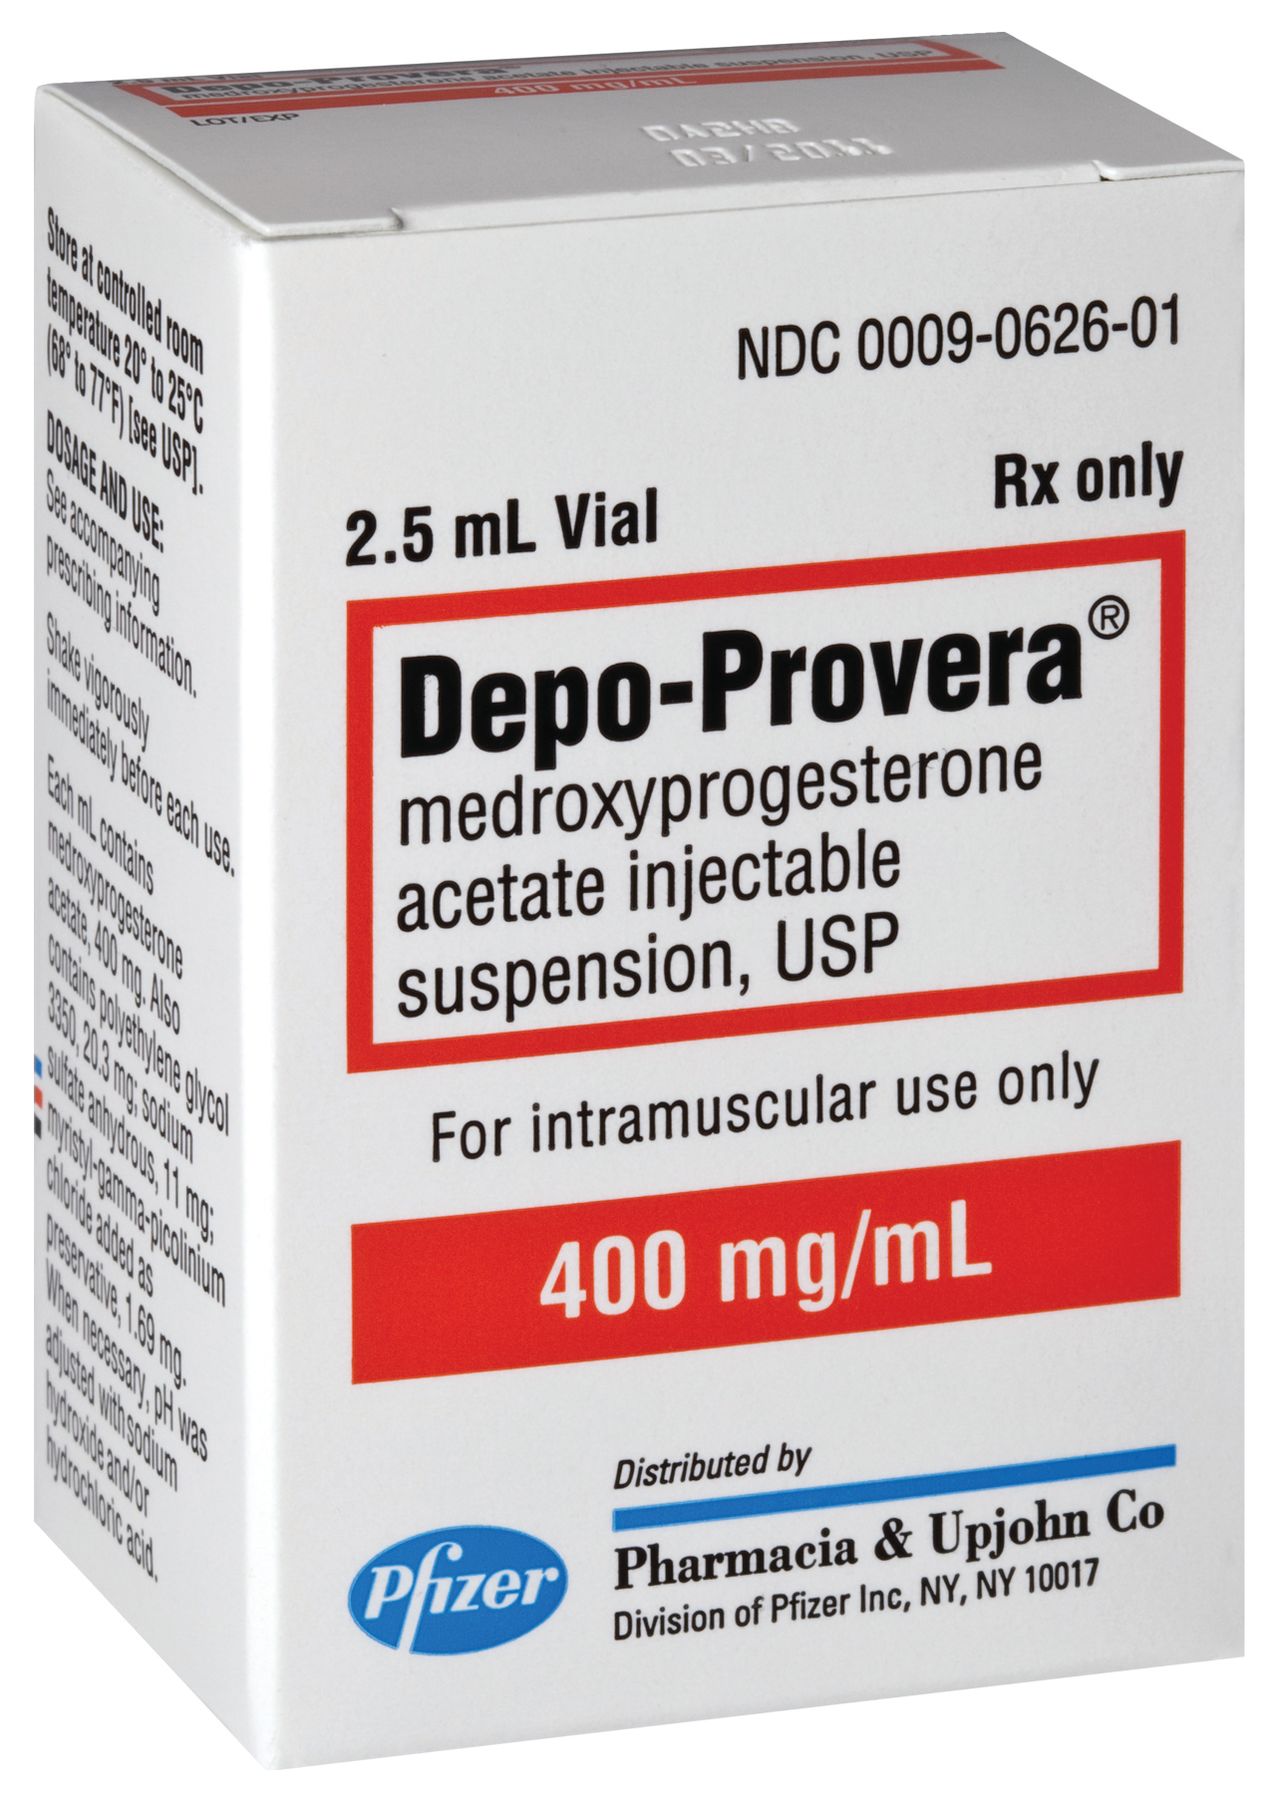 Depo-Provera, an injection form of birth control, provides protection for three months with hormones that prevent ovulation and block sperm. It doesn't contain estrogen, as do some other forms of birth control. As a result, it is a popular option for women who can't take estrogen or who are breastfeeding. 